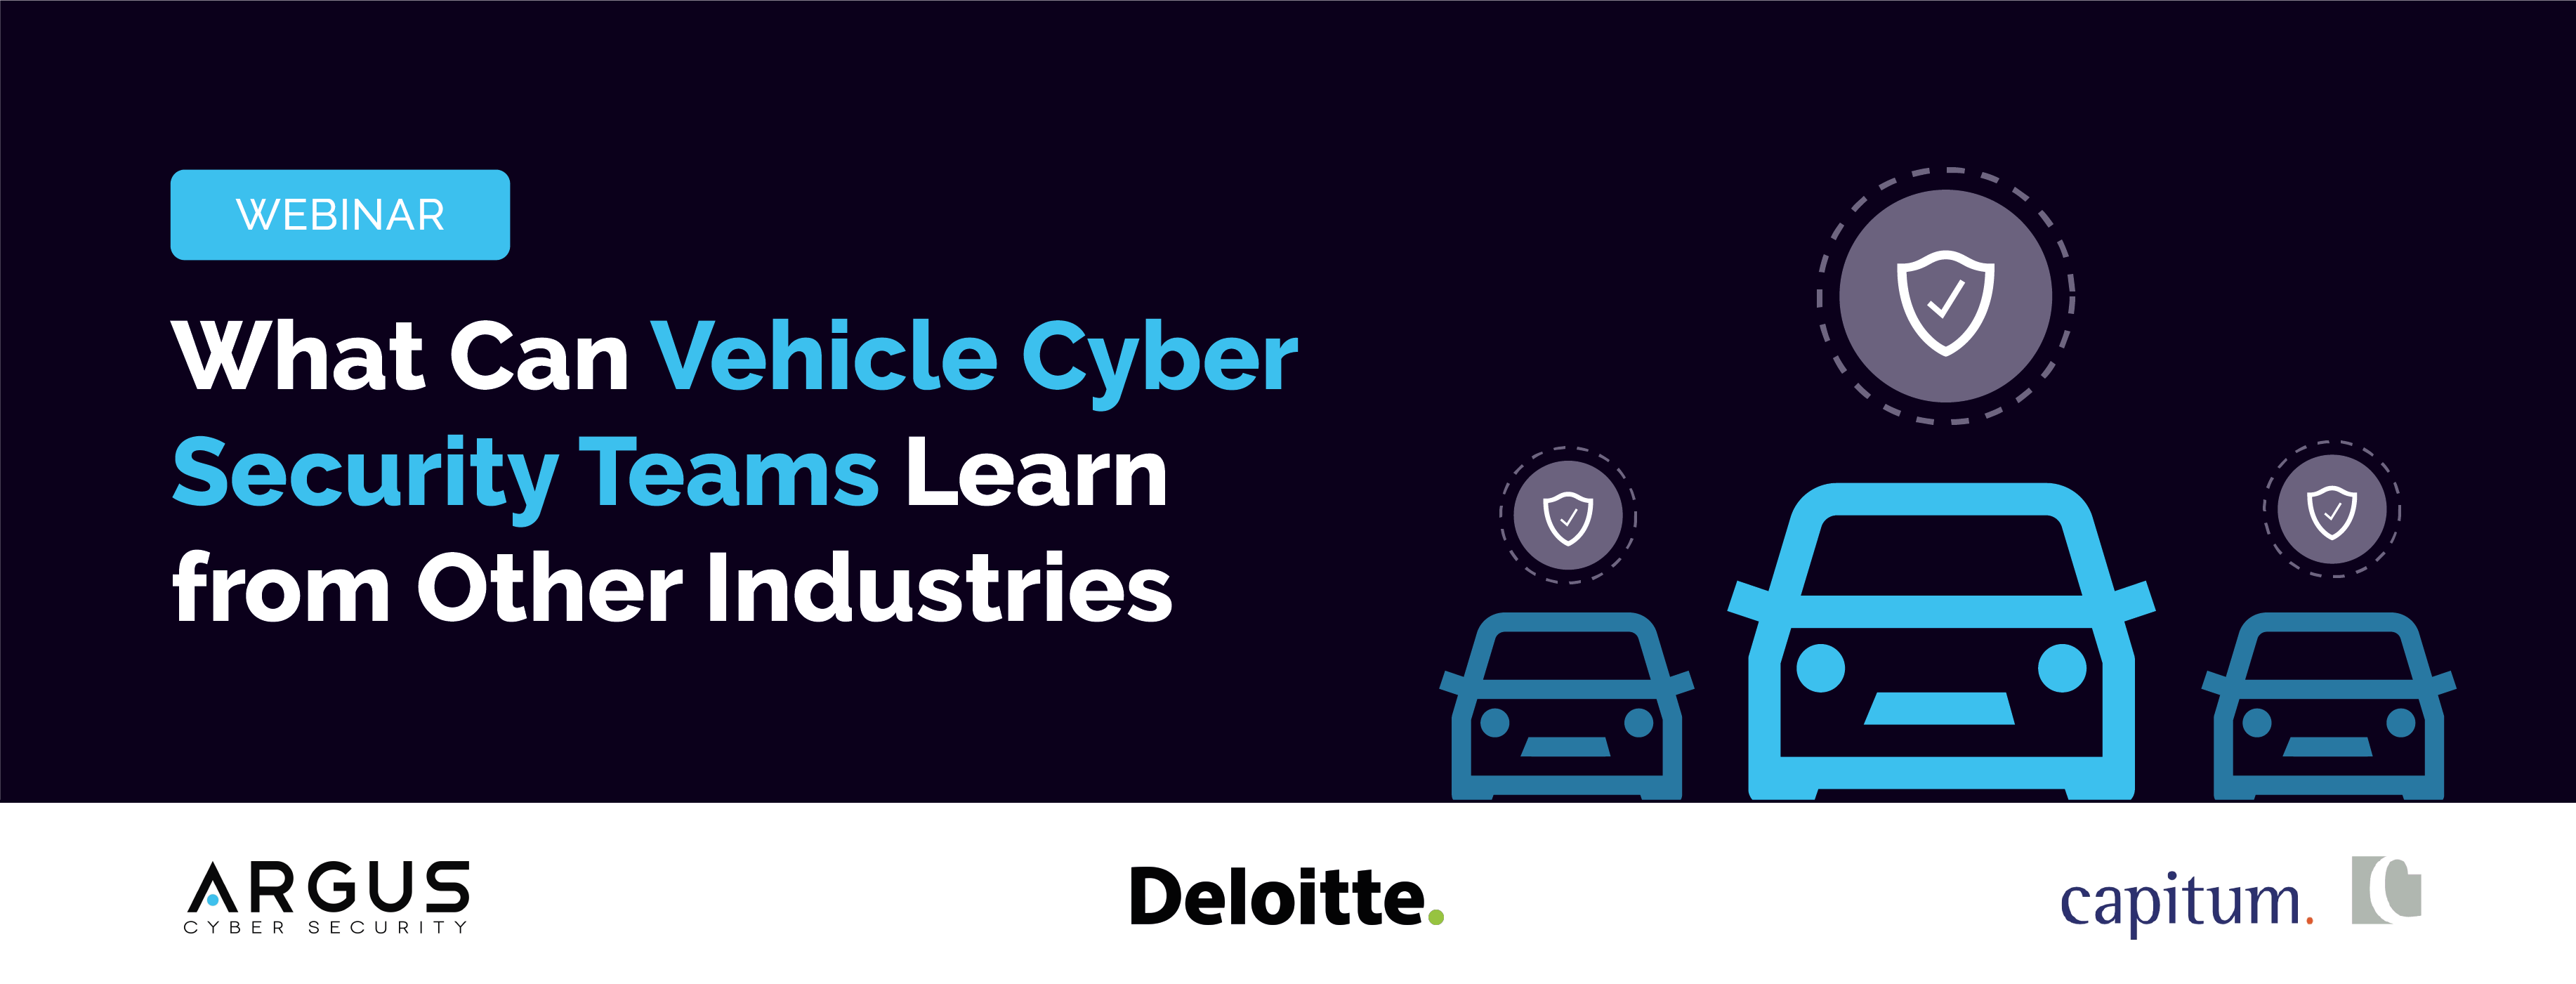 Webinar Recording: What Can Vehicle Cyber Security Teams Learn from Other Industries